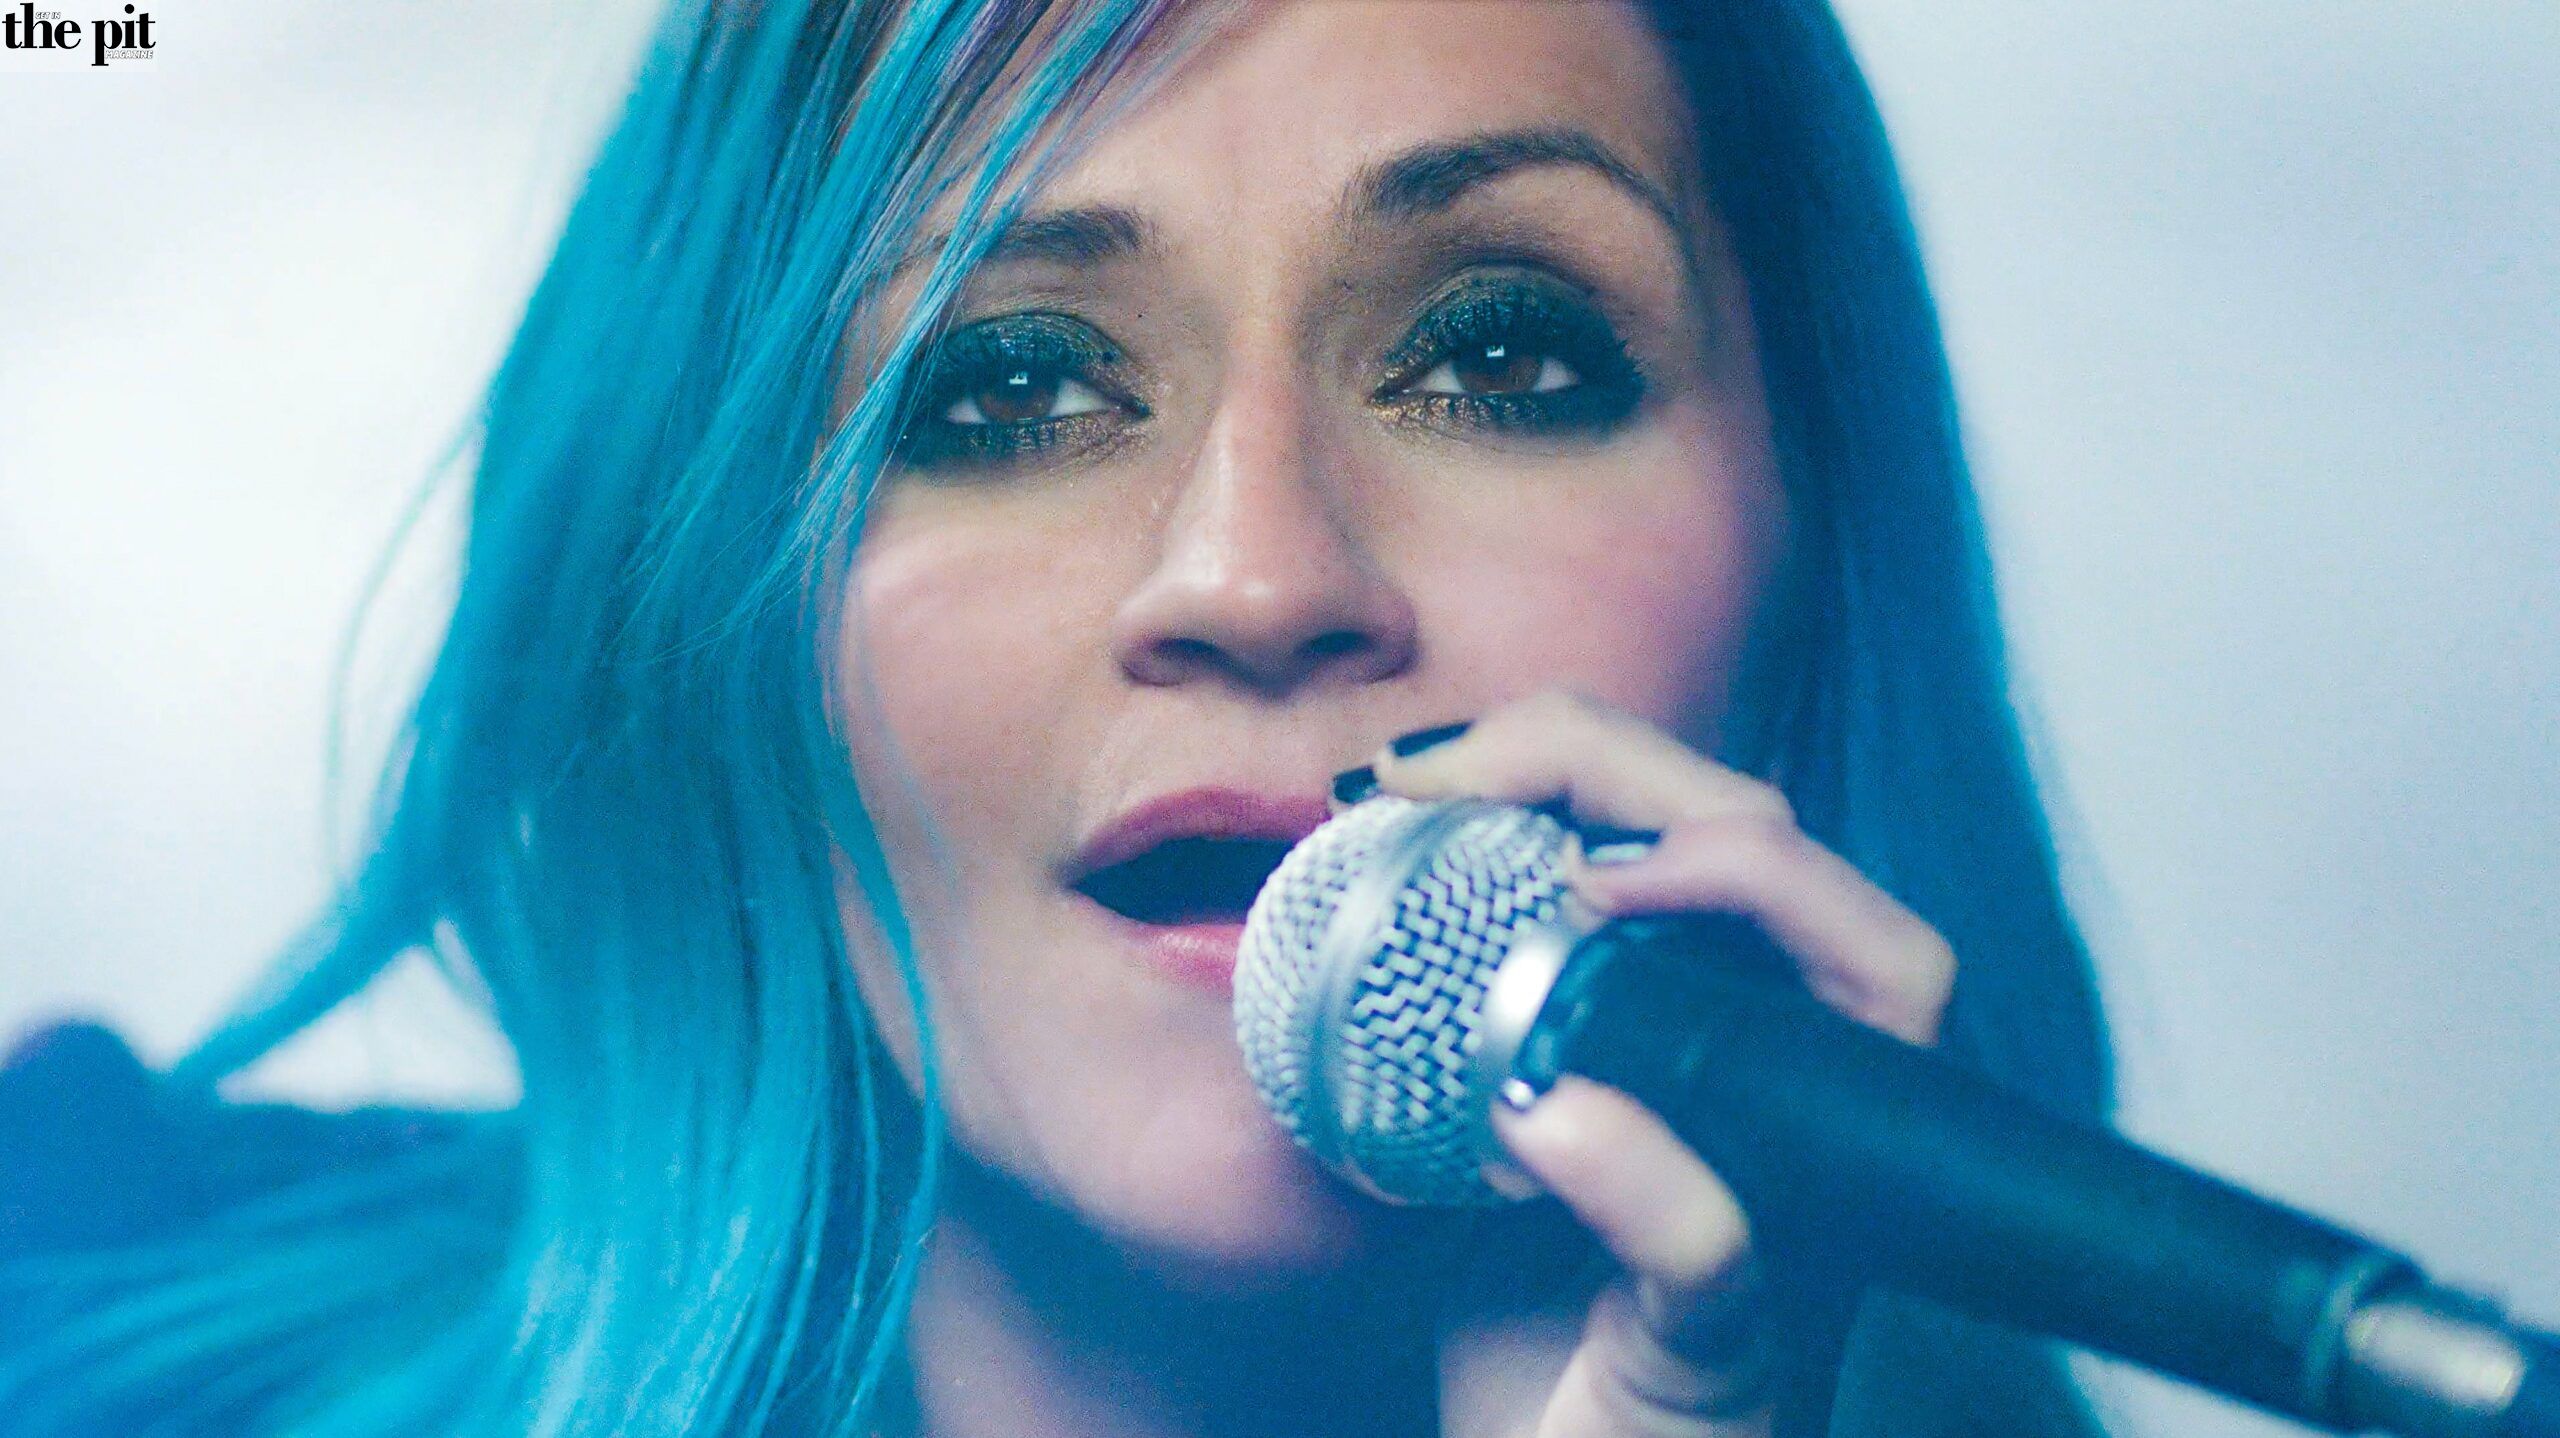 Lacey Sturm, a woman with blue hair singing into a microphone, intense expression, close-up view.